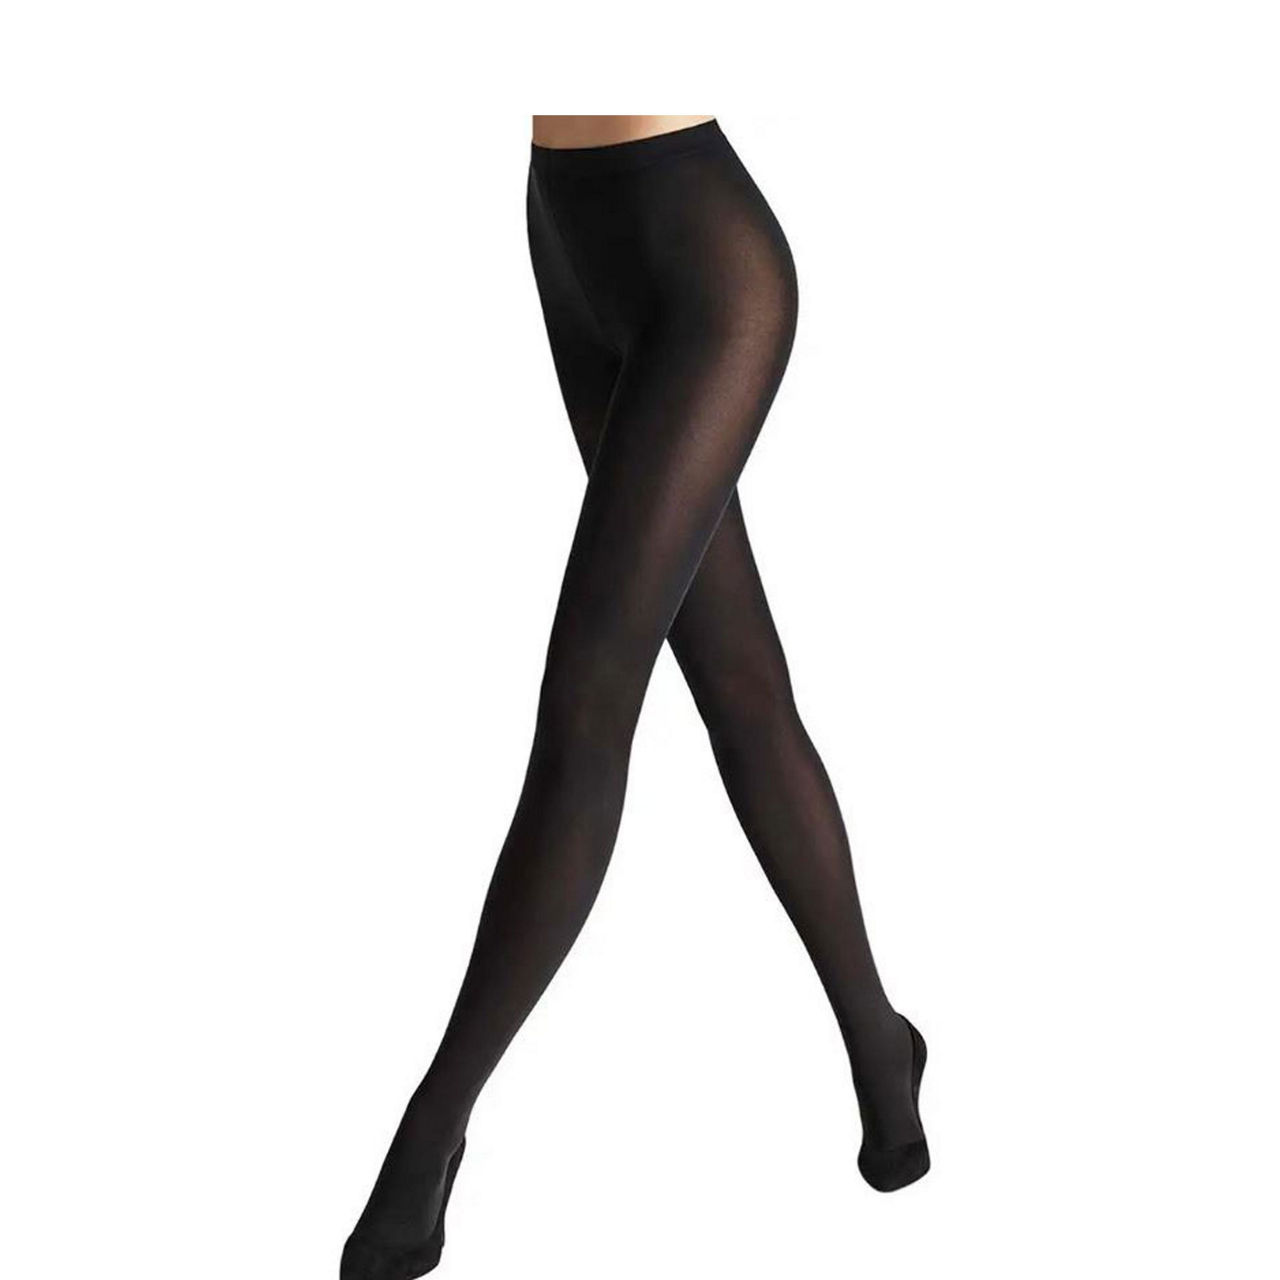 hose., Tights & Hosiery, Gold Stag Print Black Tights